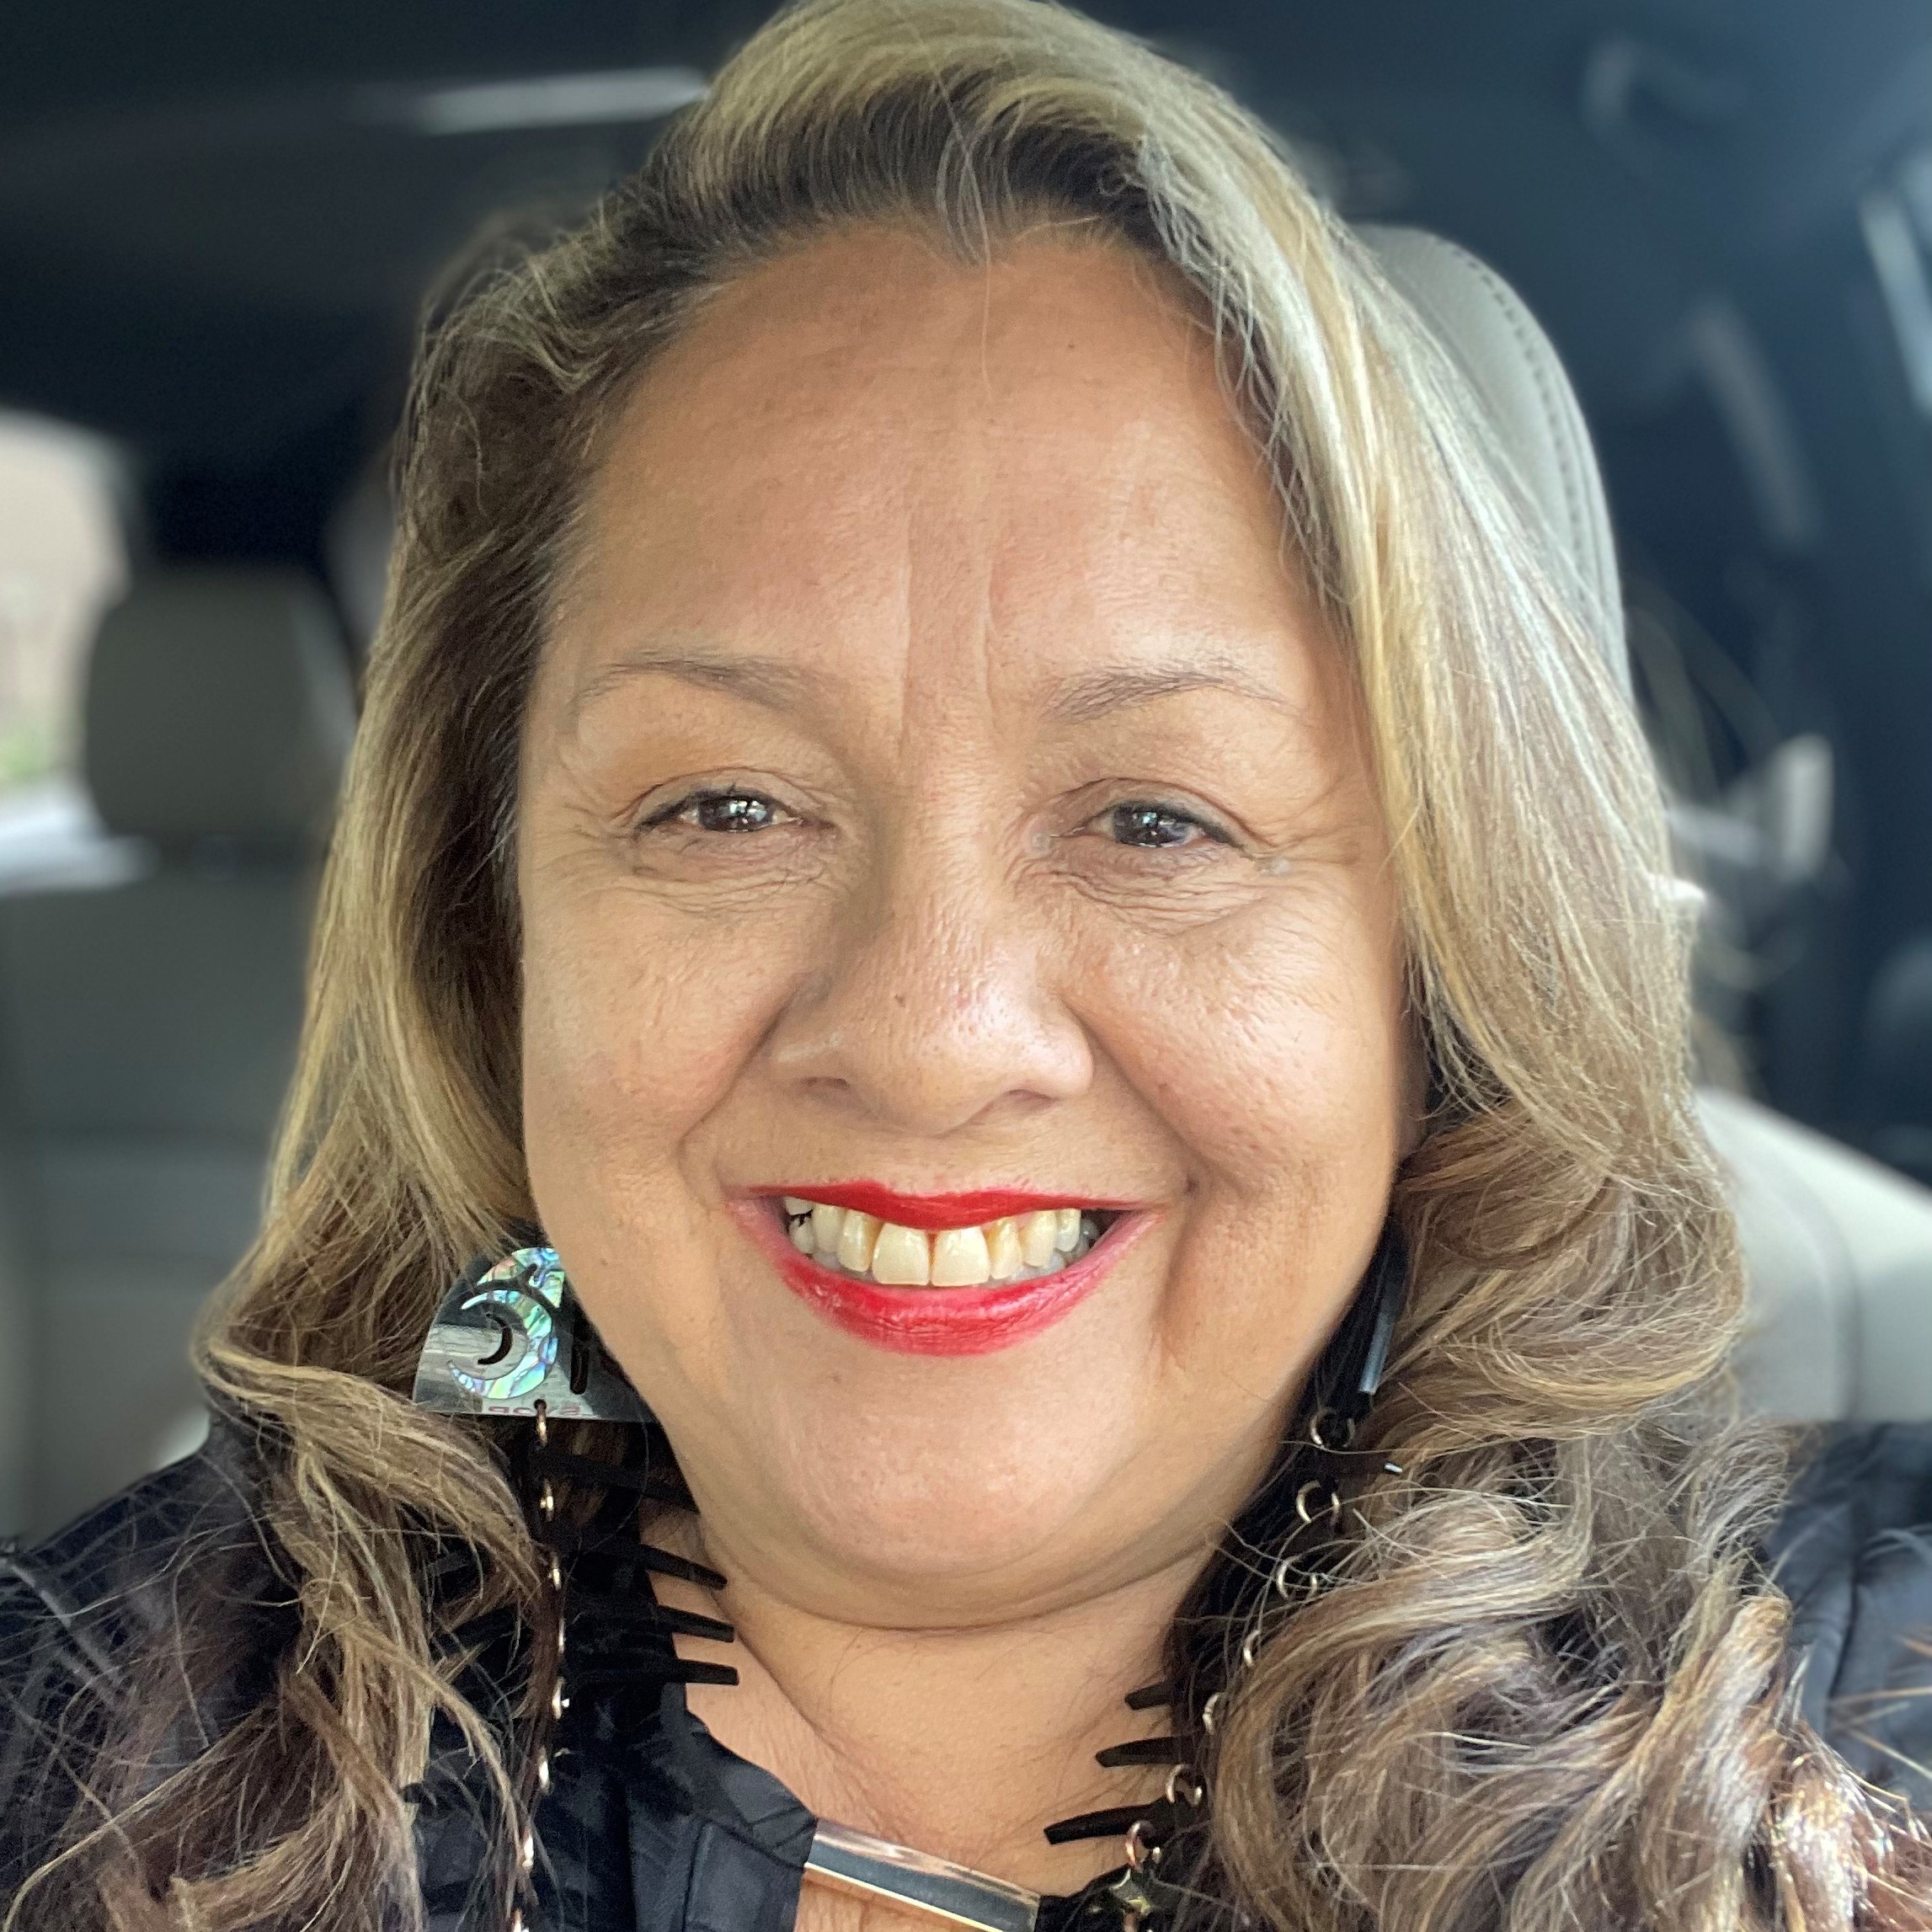 Head shot of Lori Laiwa Thomas. She is smiling at the camera. Her hair is long, brown, and curled with blond highlights. She is wearing red lipstick and abalone fish earrings and a black top.